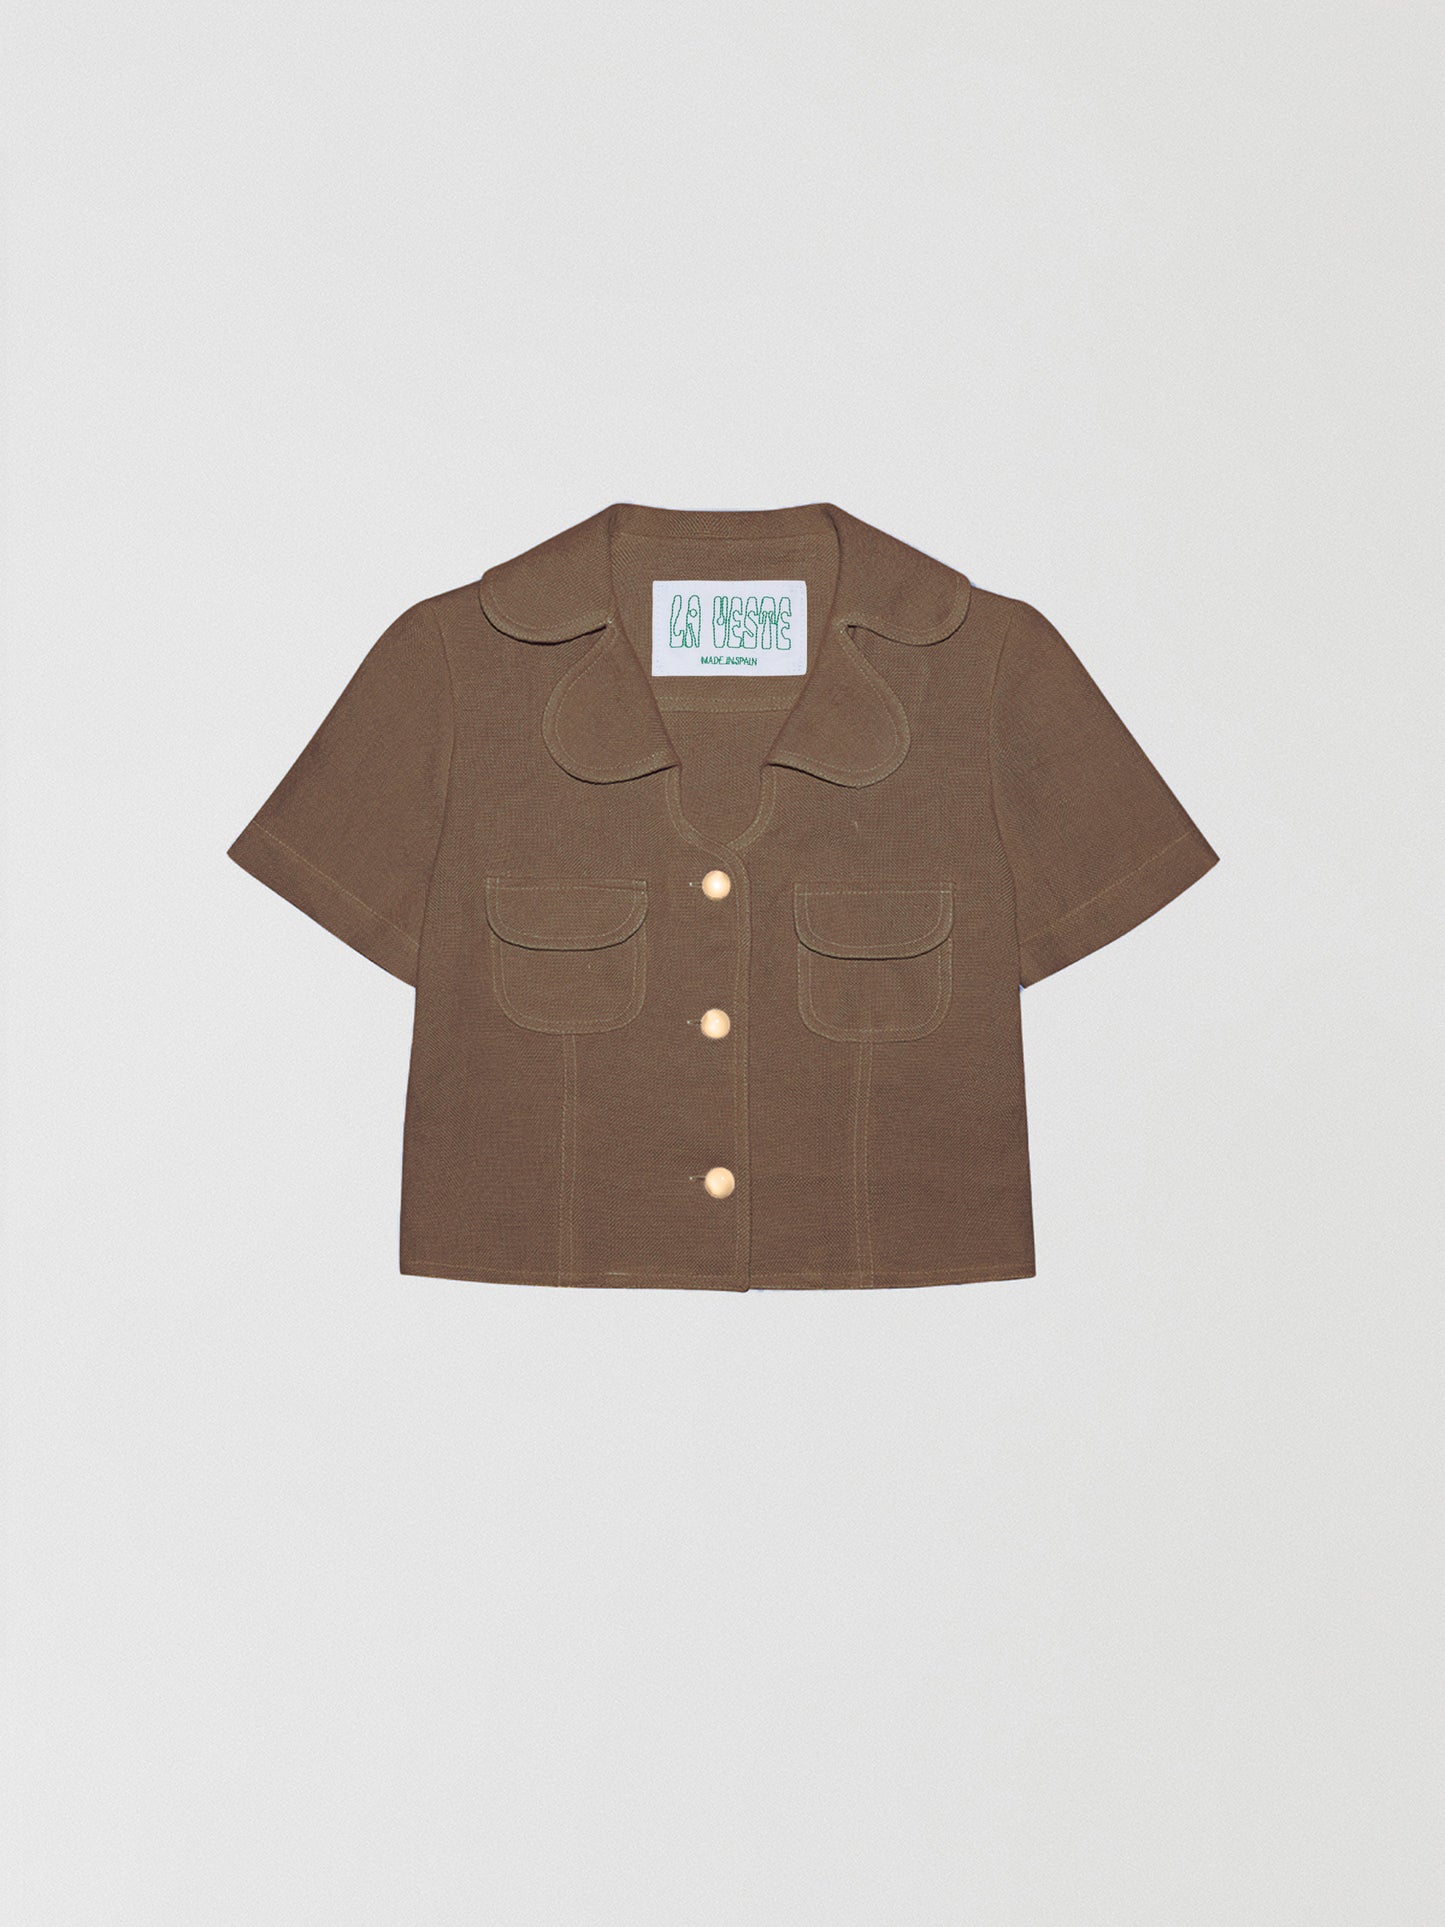 Loto Brown Shirt is a short-sleeved brown shirt with buttons and front pockets in the same color.